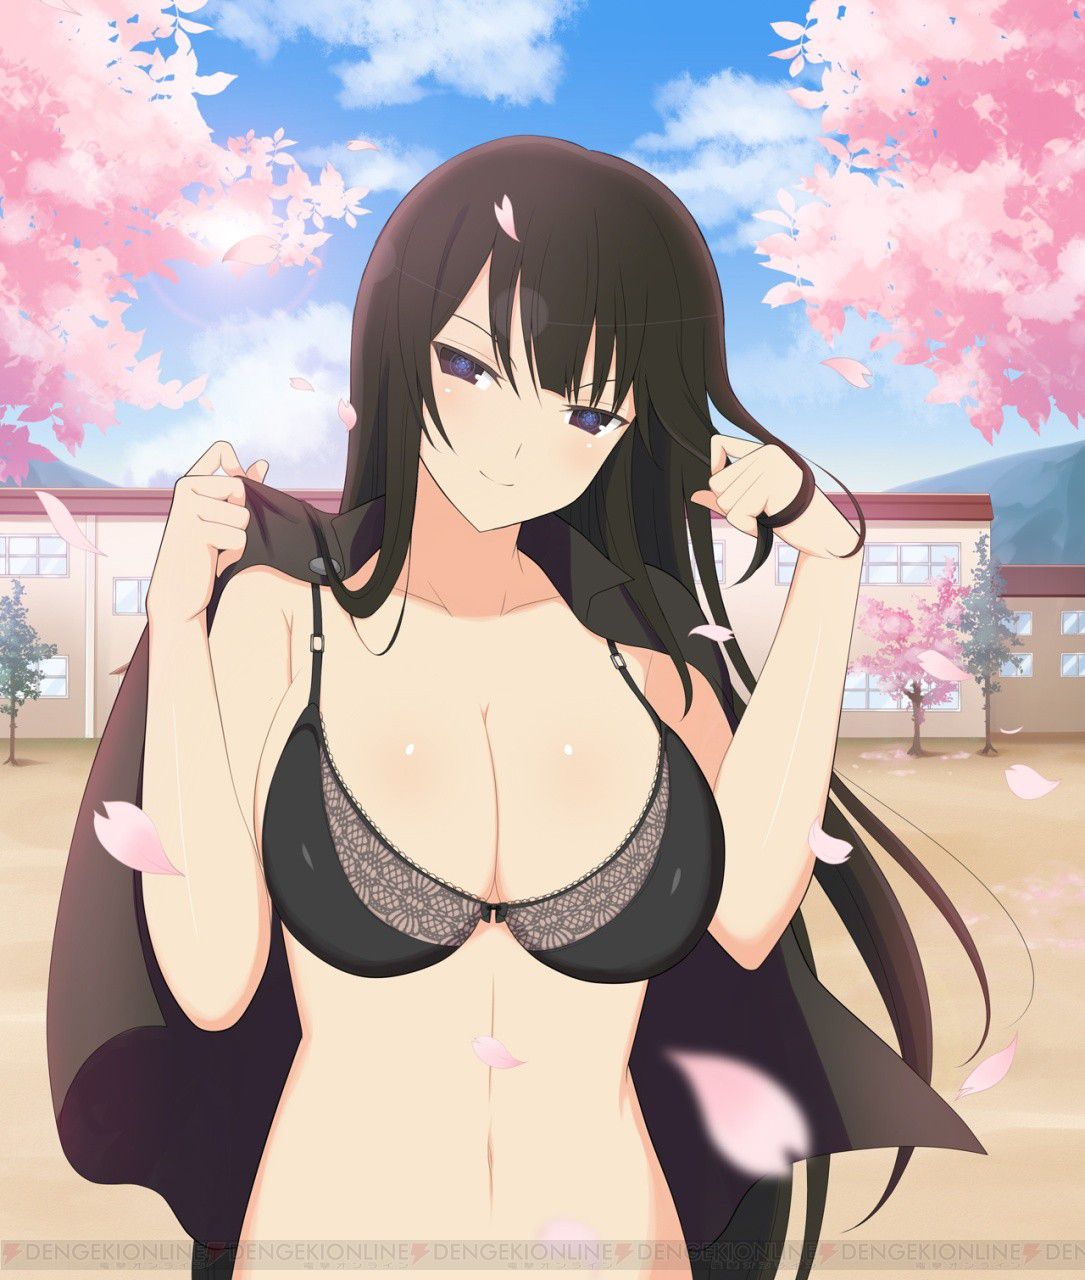 [Senran Kagura] [best PIE Championship] is held! Popular character vote is determined by the size of the breast! 31